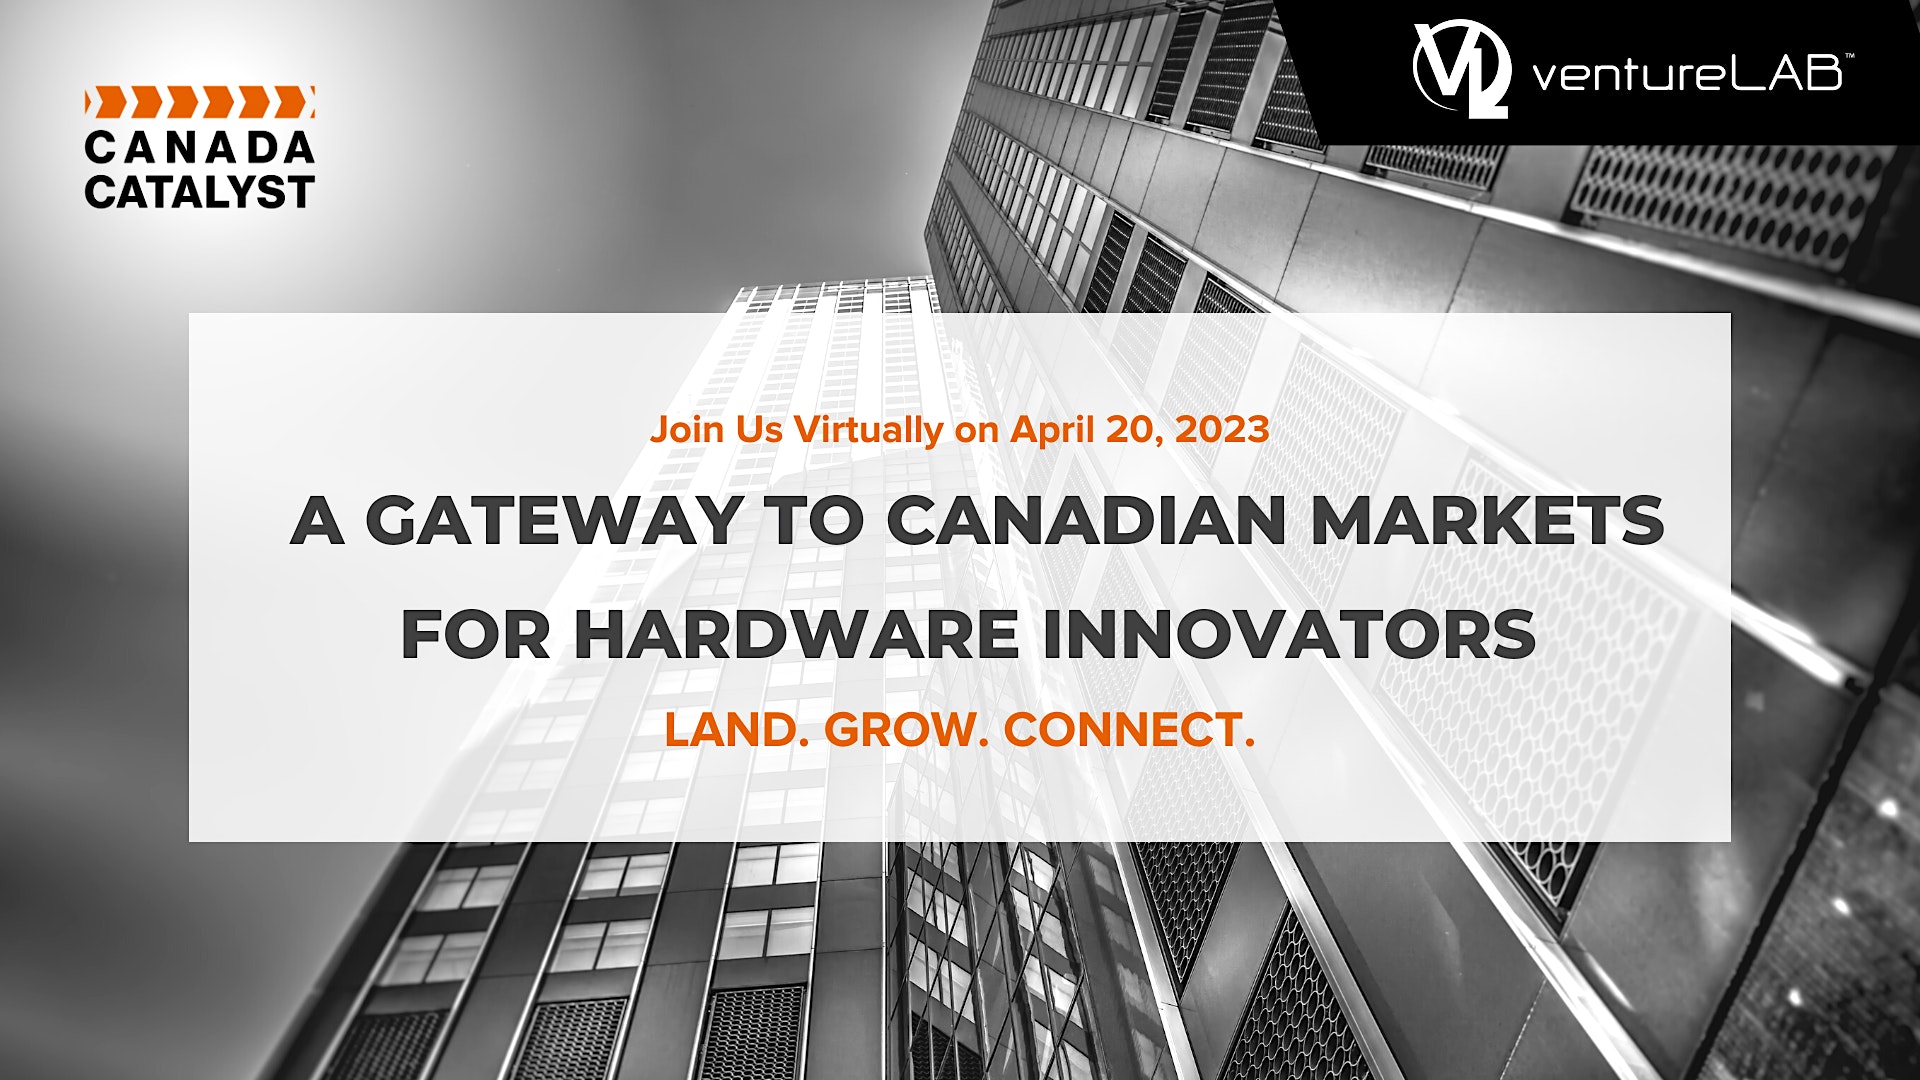 ventureLAB's virtual event on April 20, 2023. A gateway to Canadian markets for hardware innovators.